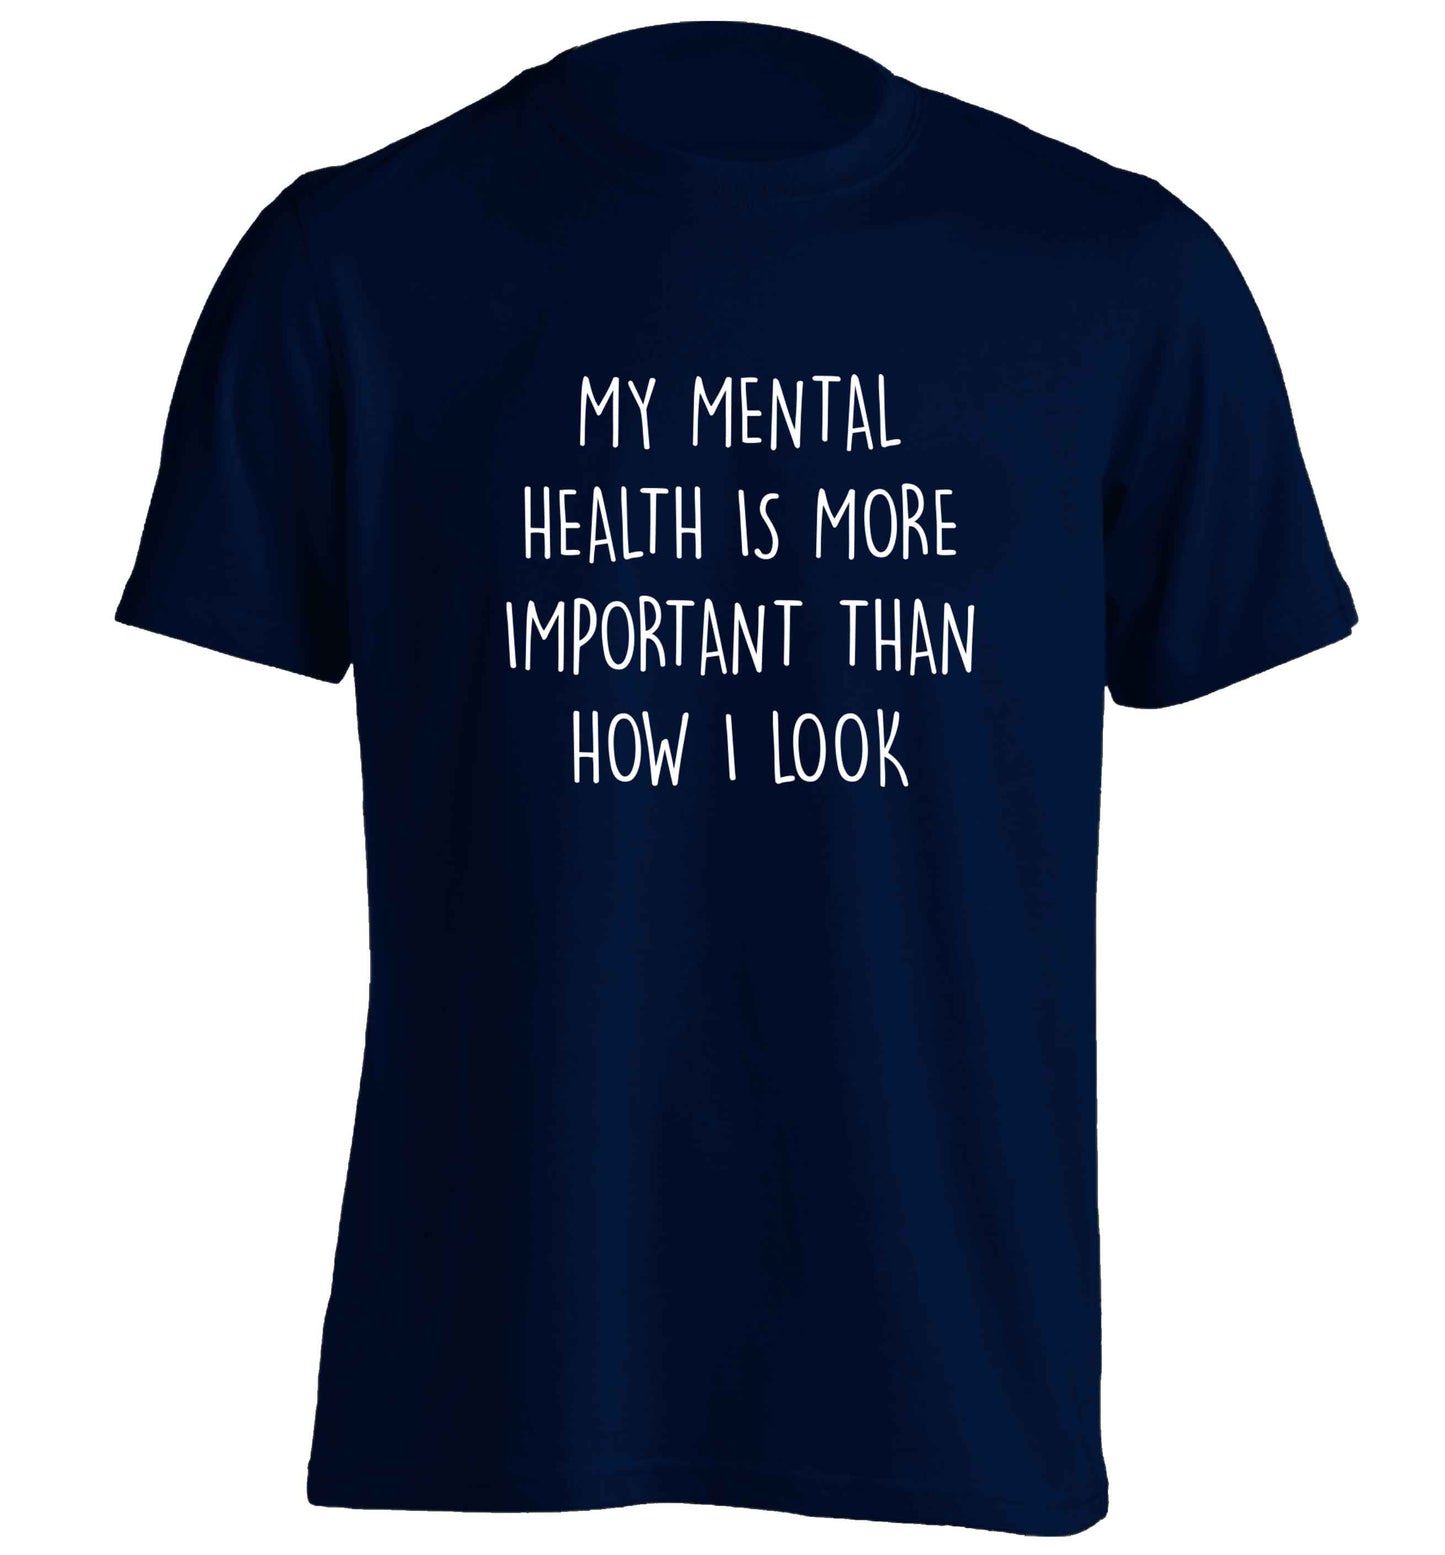 My mental health is more importnat than how I look adults unisex navy Tshirt 2XL